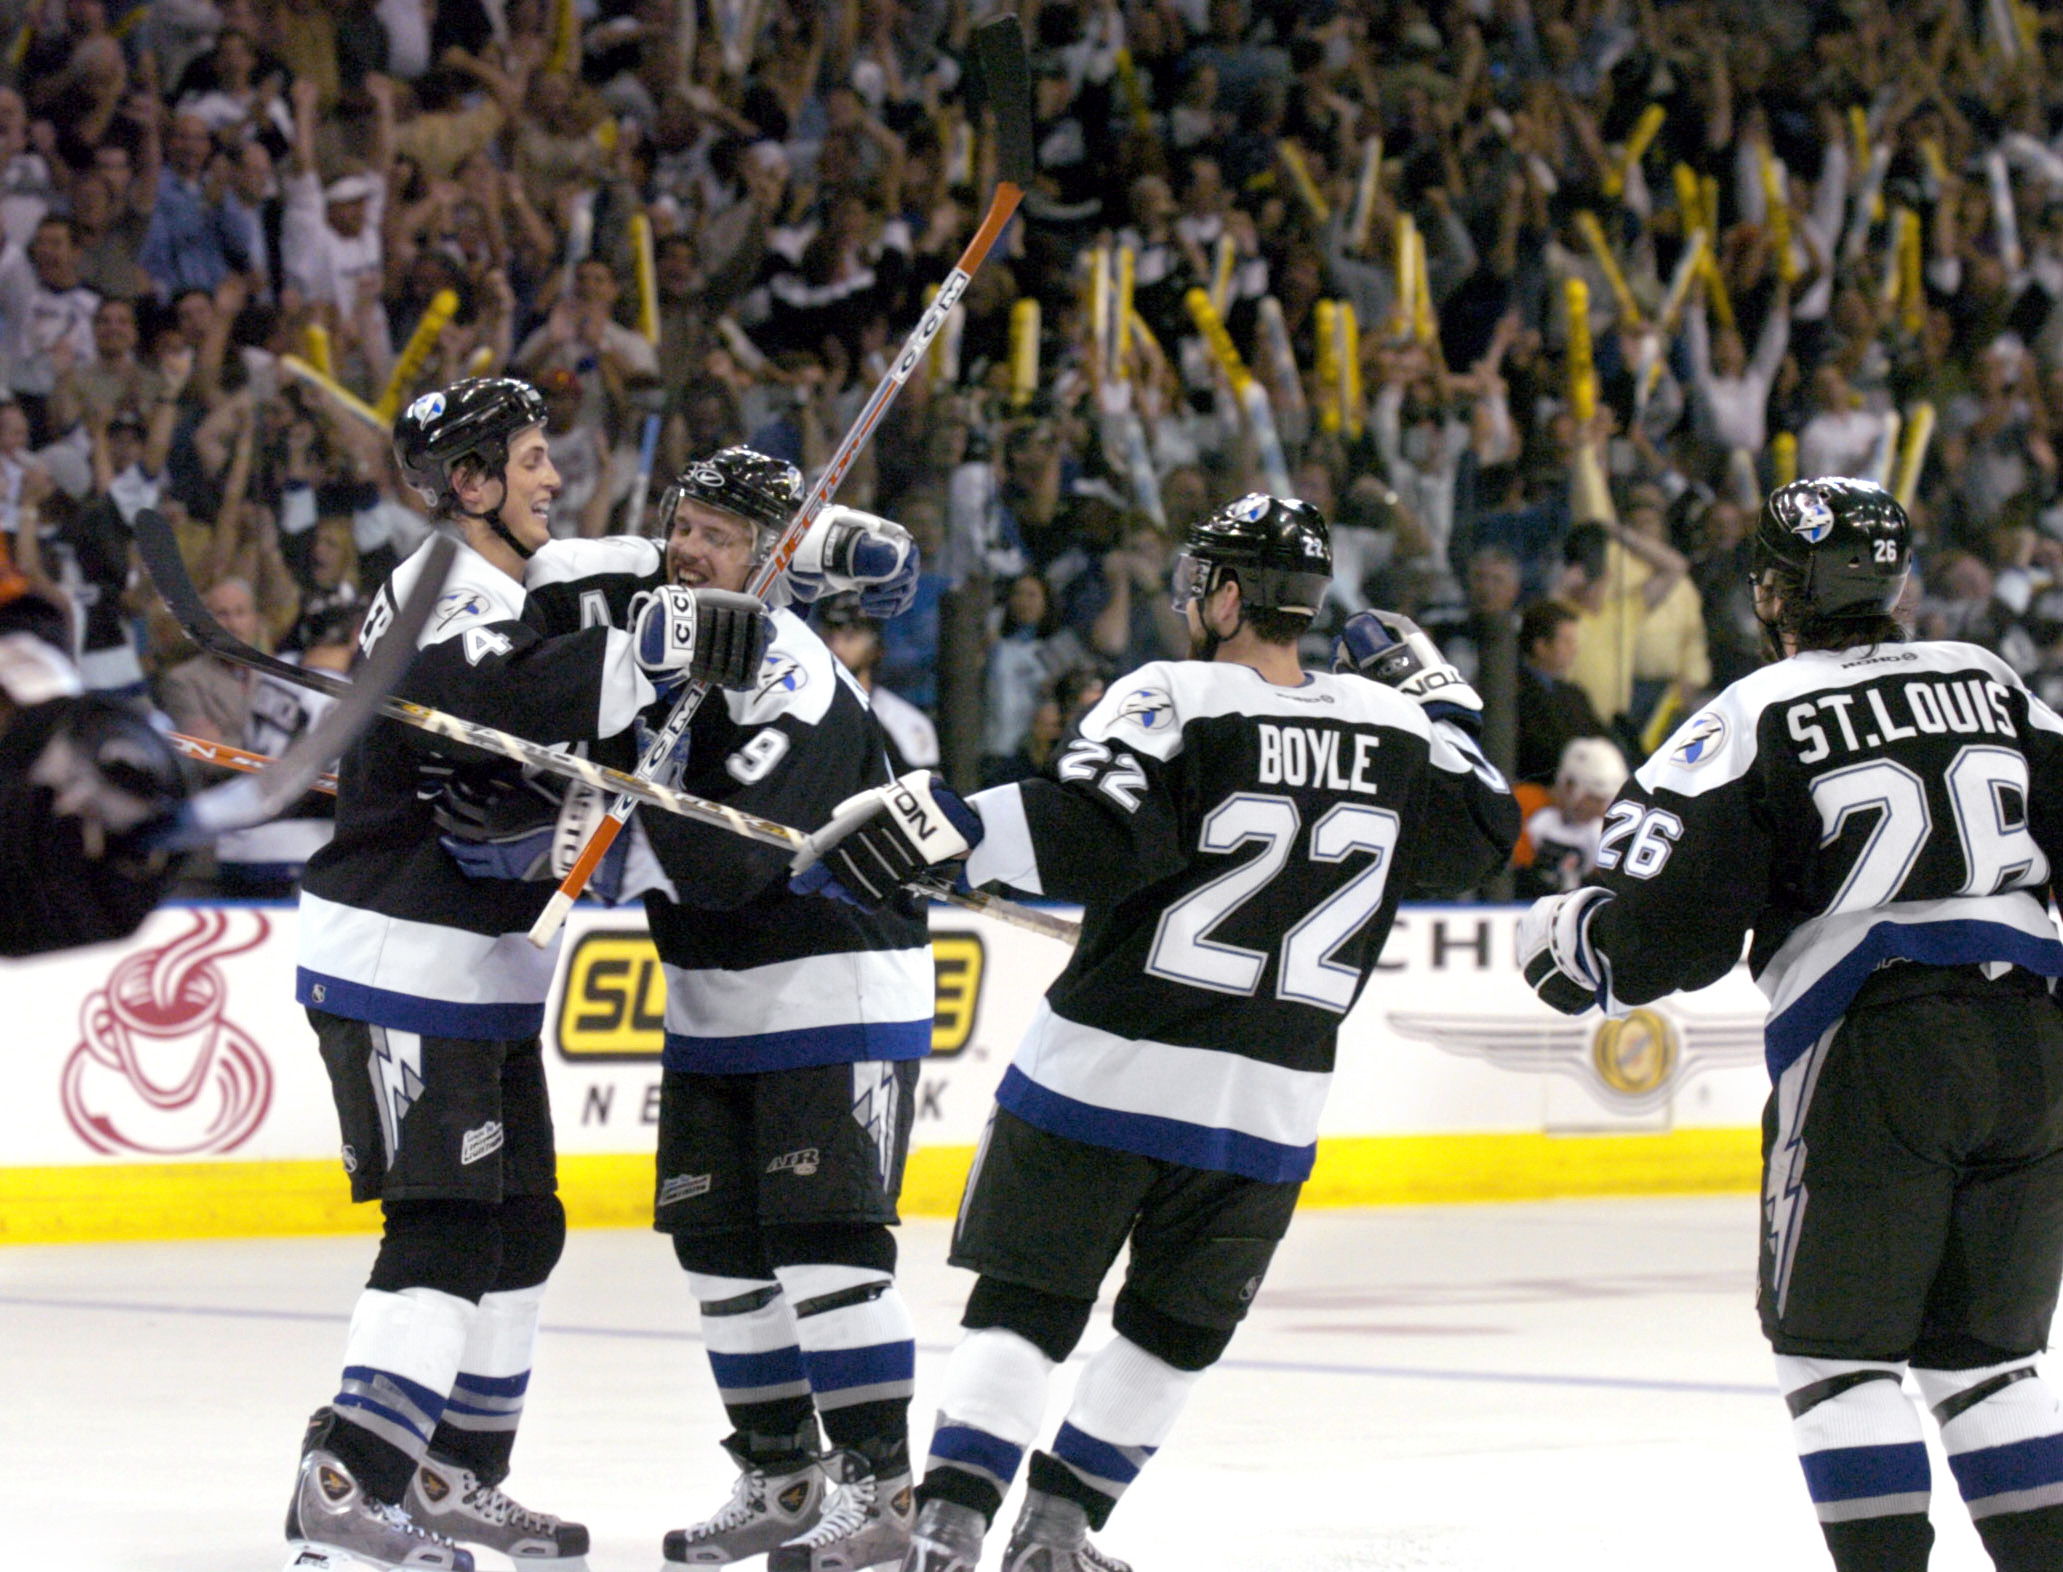 DAN BOYLE 2004 Cup Finals Tampa Bay Lightning Photomatched Game